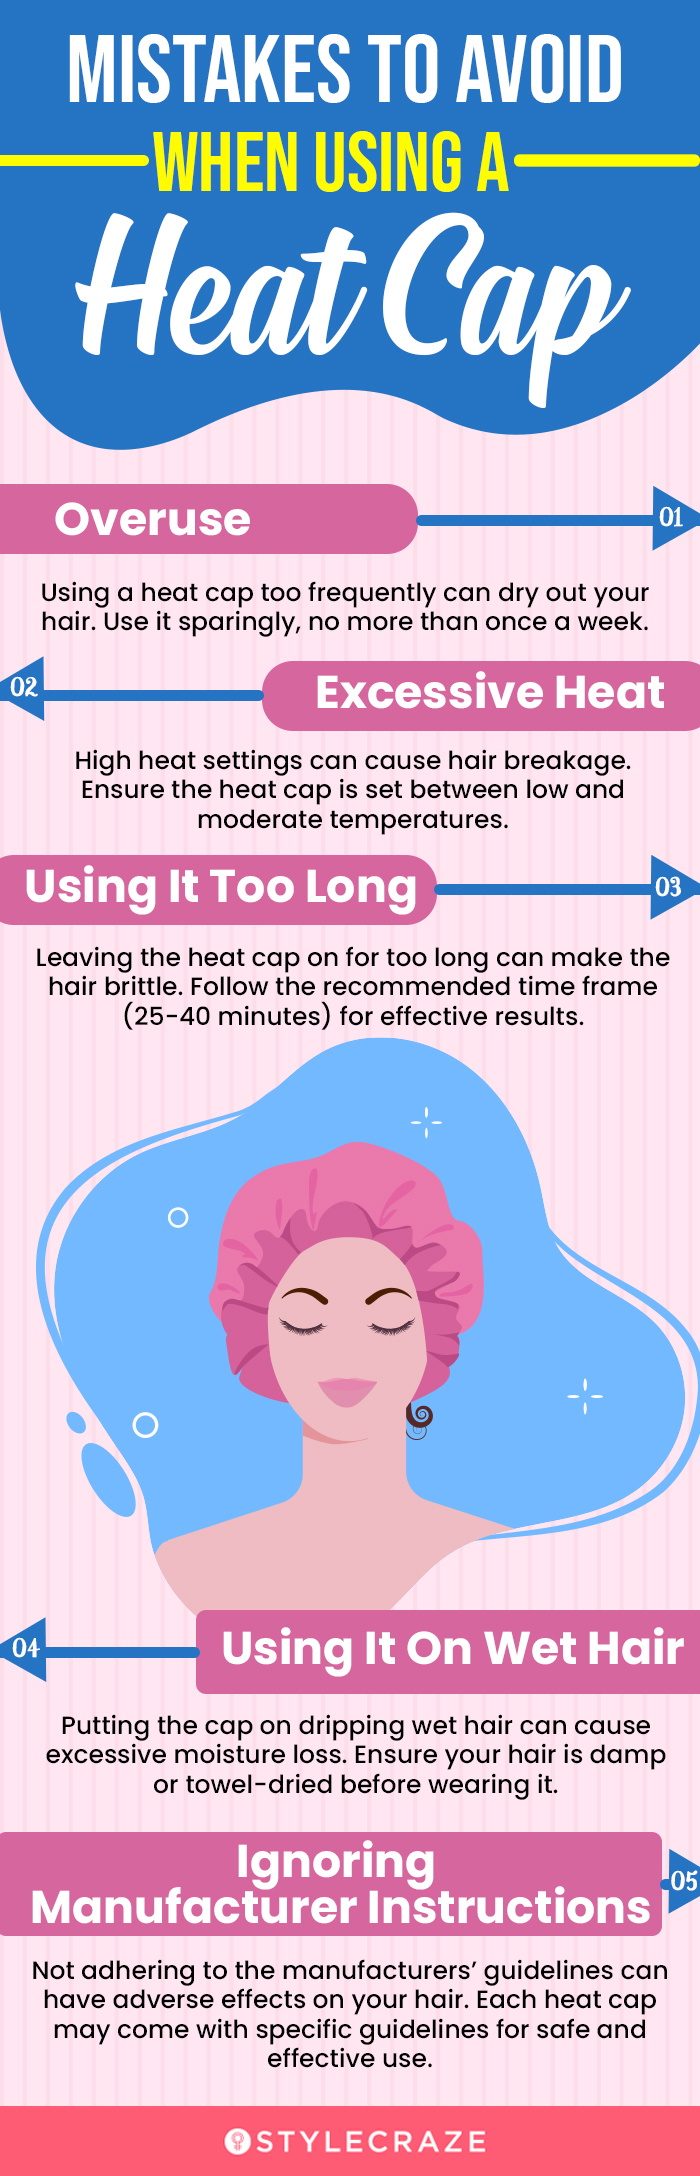 Mistakes To Avoid When Using A Heat Cap (infographic)